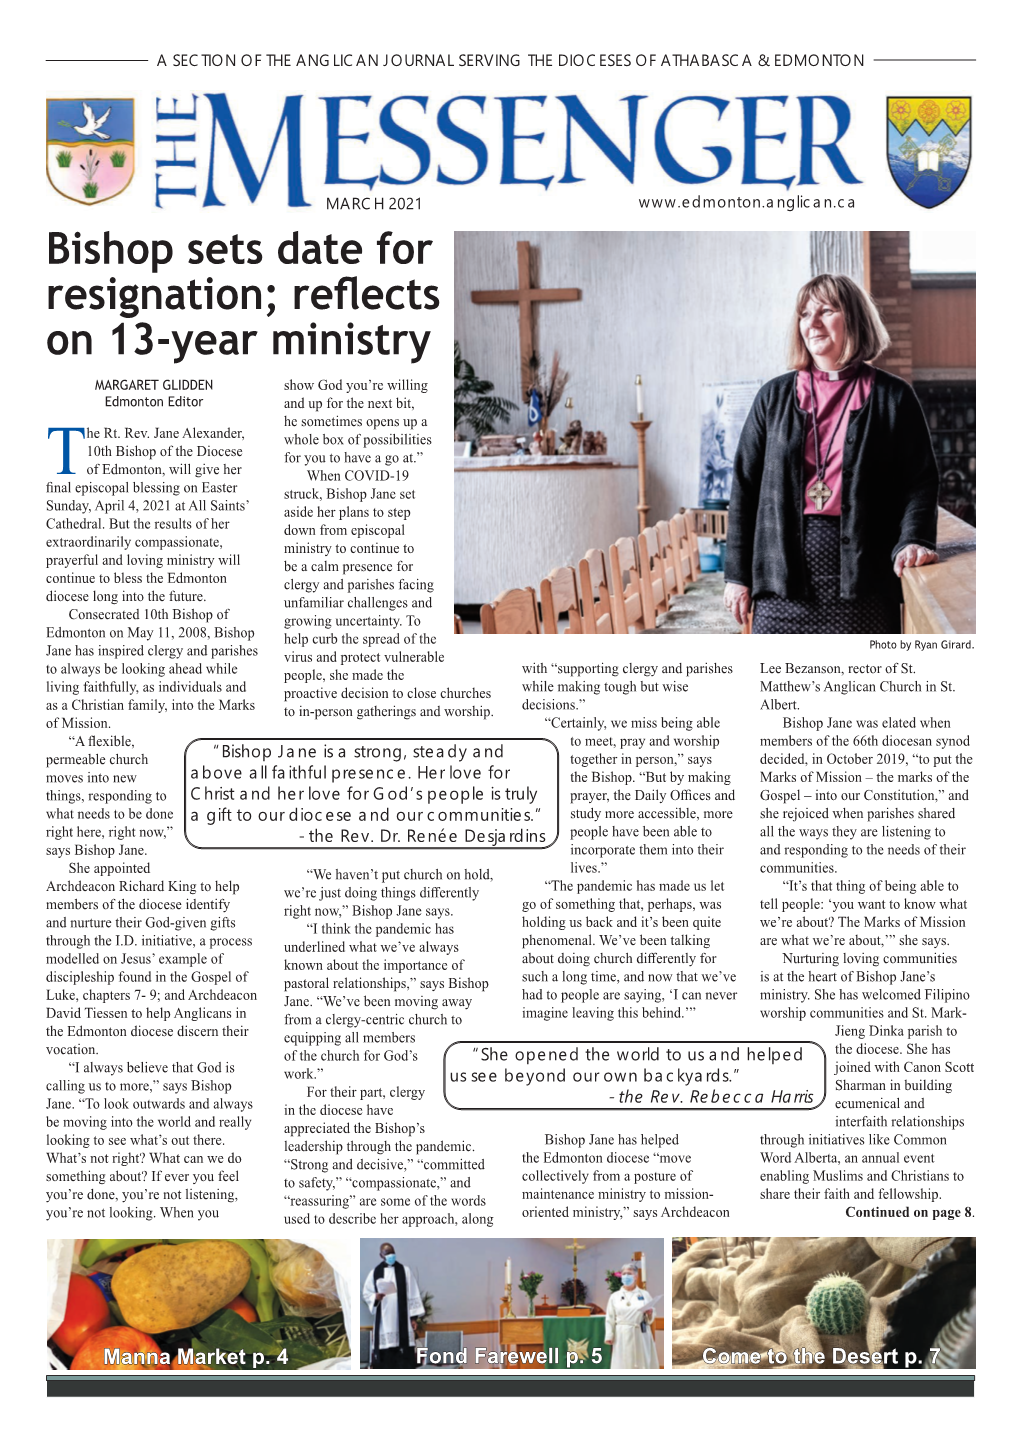 Bishop Sets Date for Resignation; Reflects on 13-Year Ministry